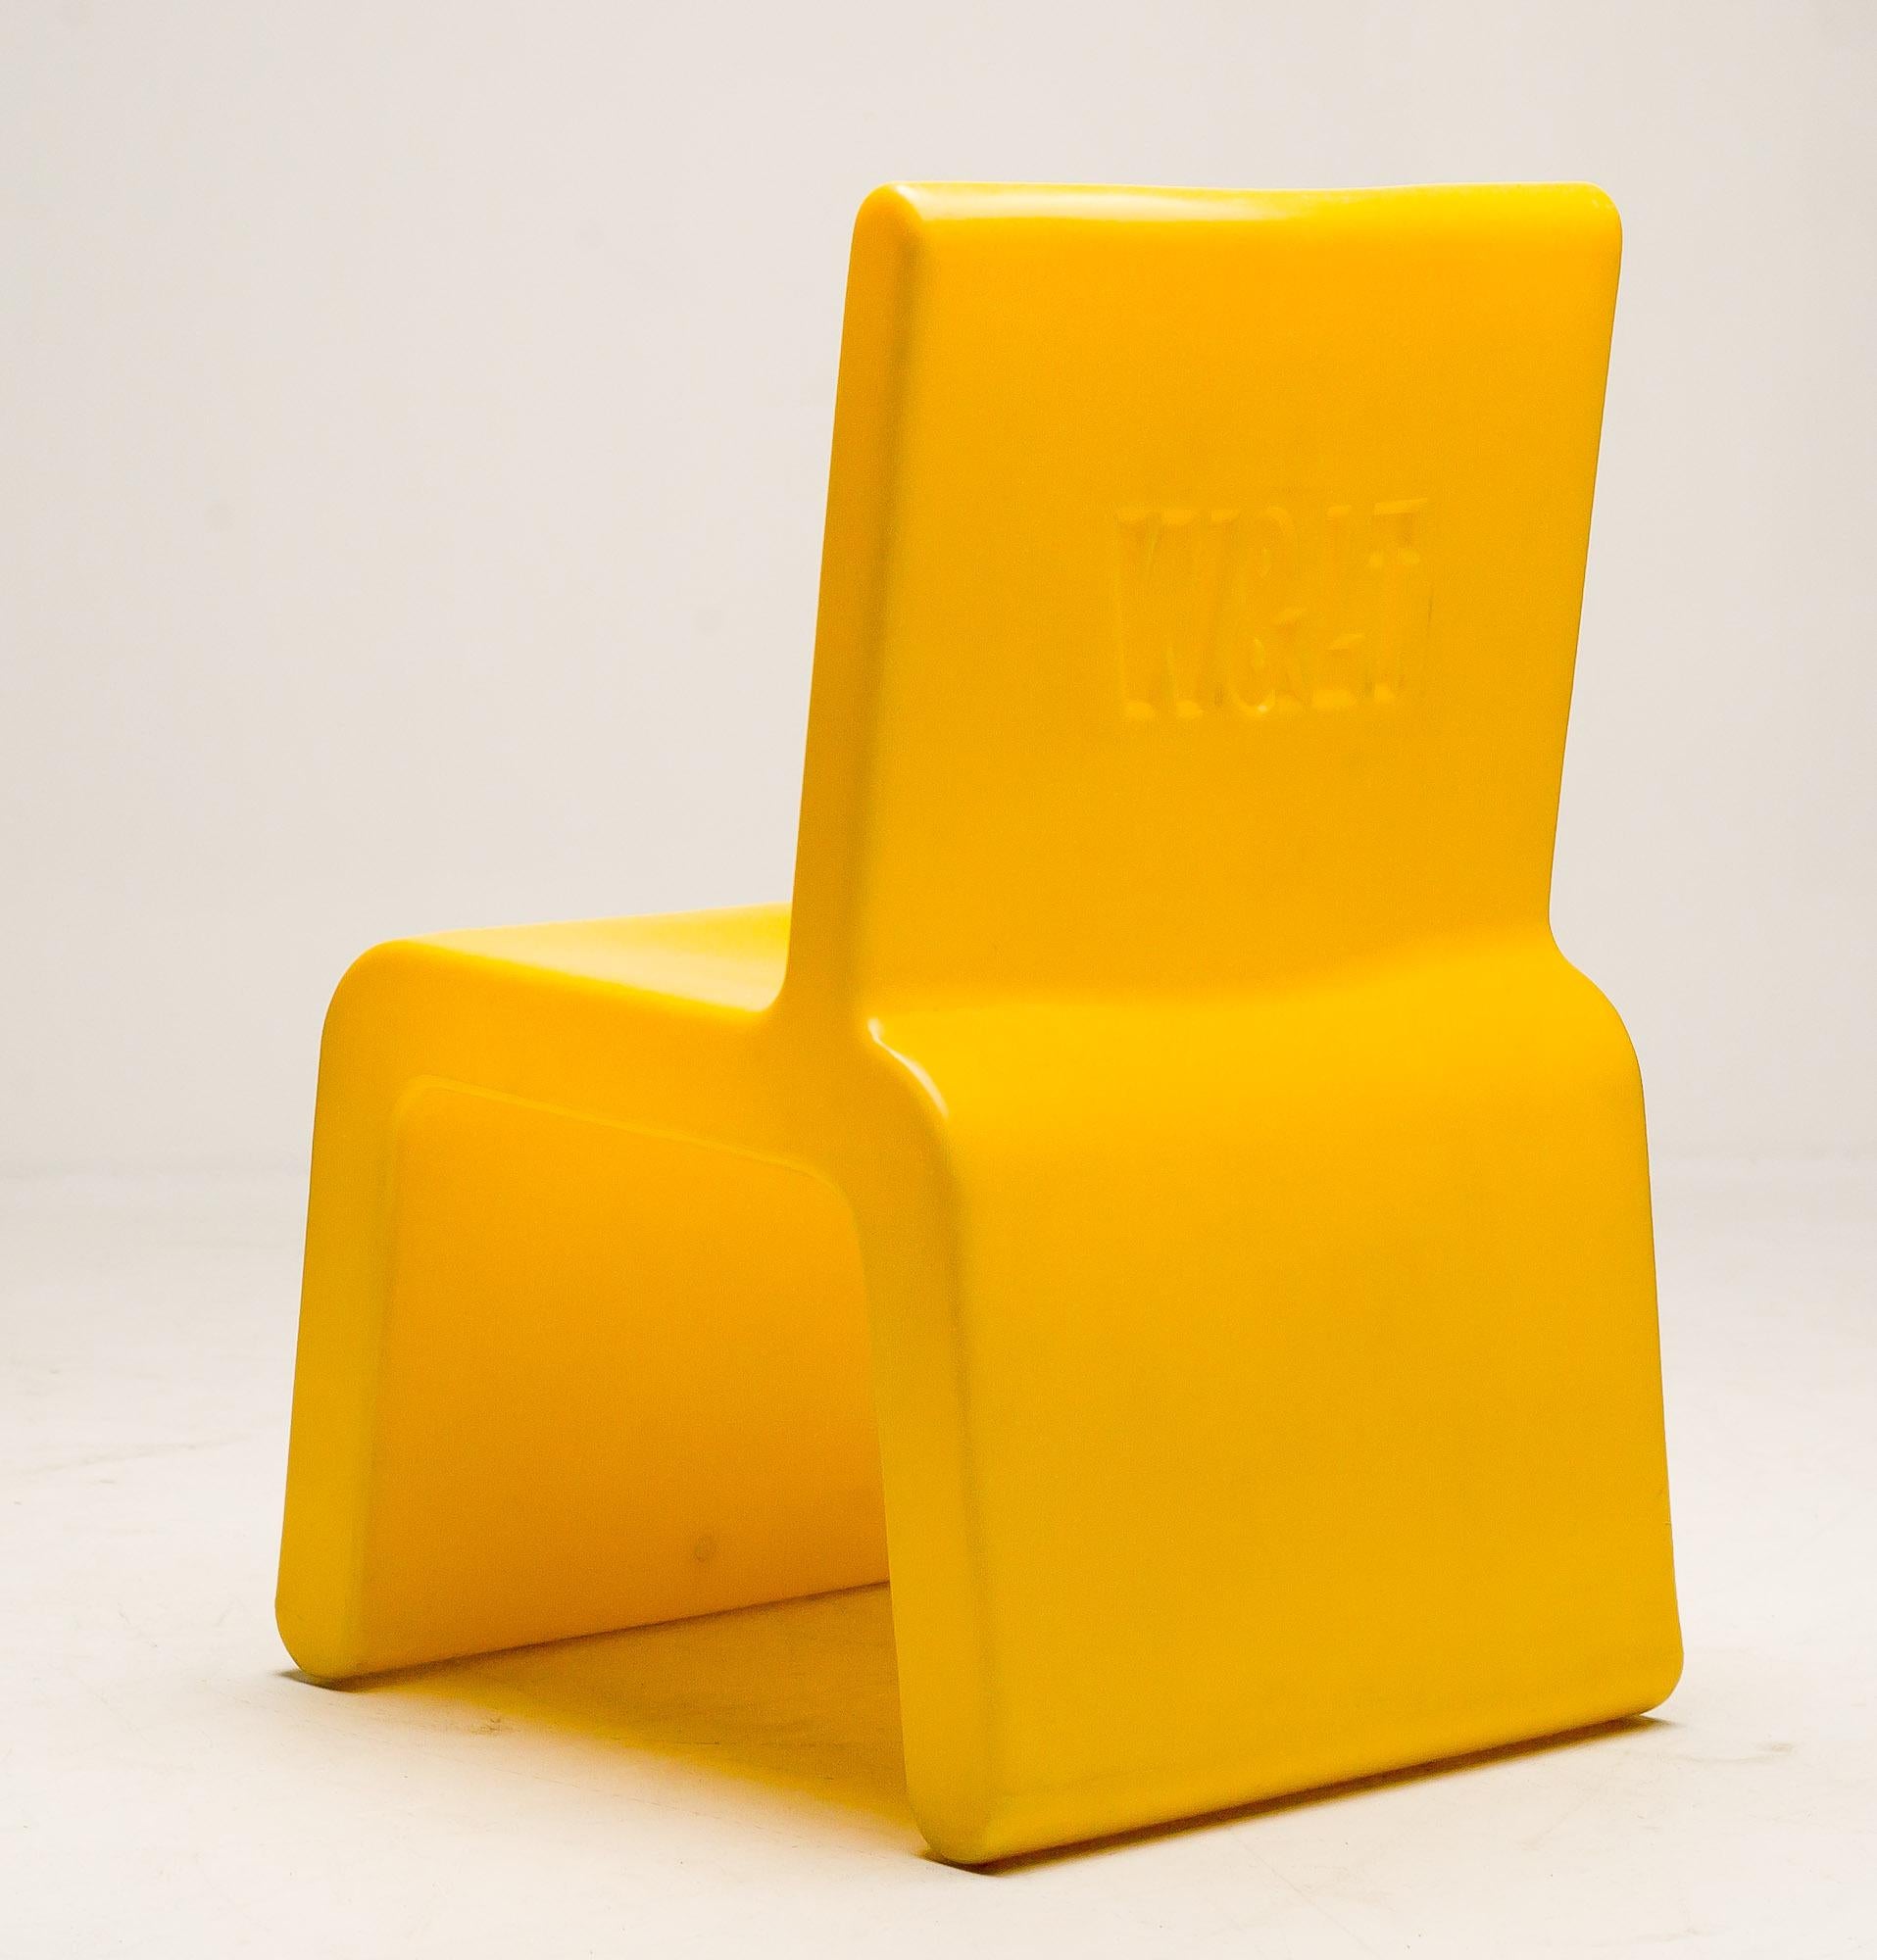 Belgian Yellow WL&T Chair by Marc Newson for Walter Van Beirendonck